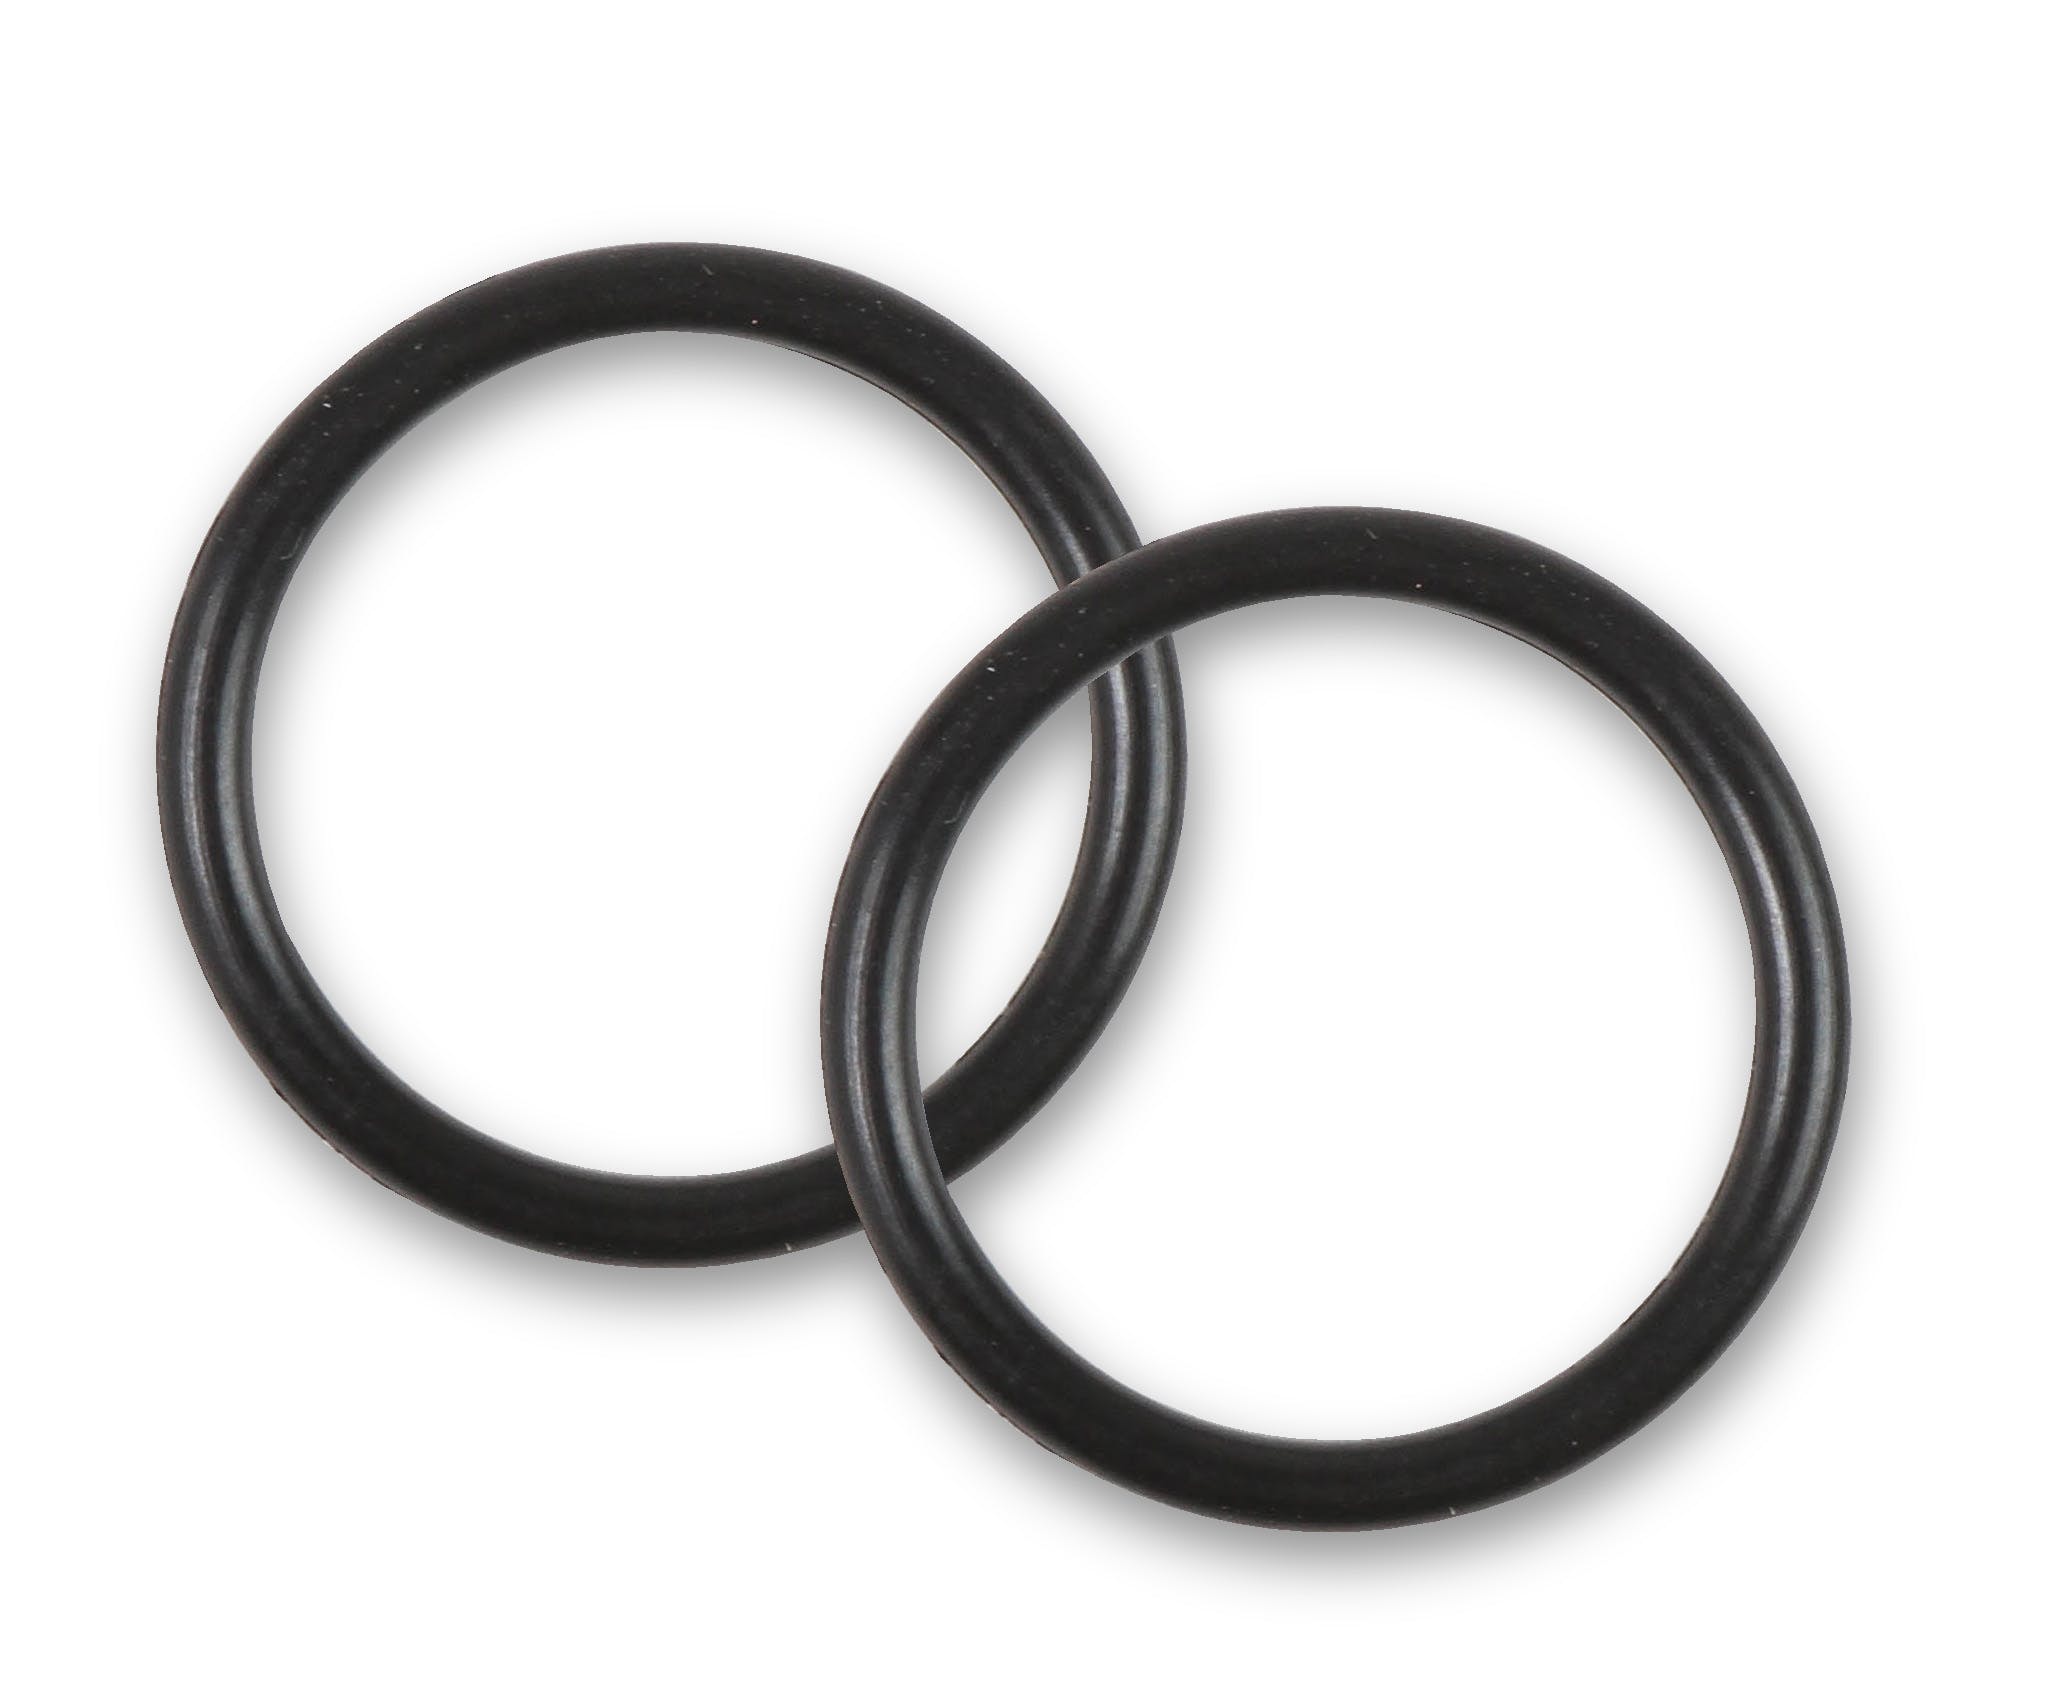 Earl's Performance Plumbing 1135ERL LS/LT REPLACEMENT O-RING KIT (2 O-RINGS)